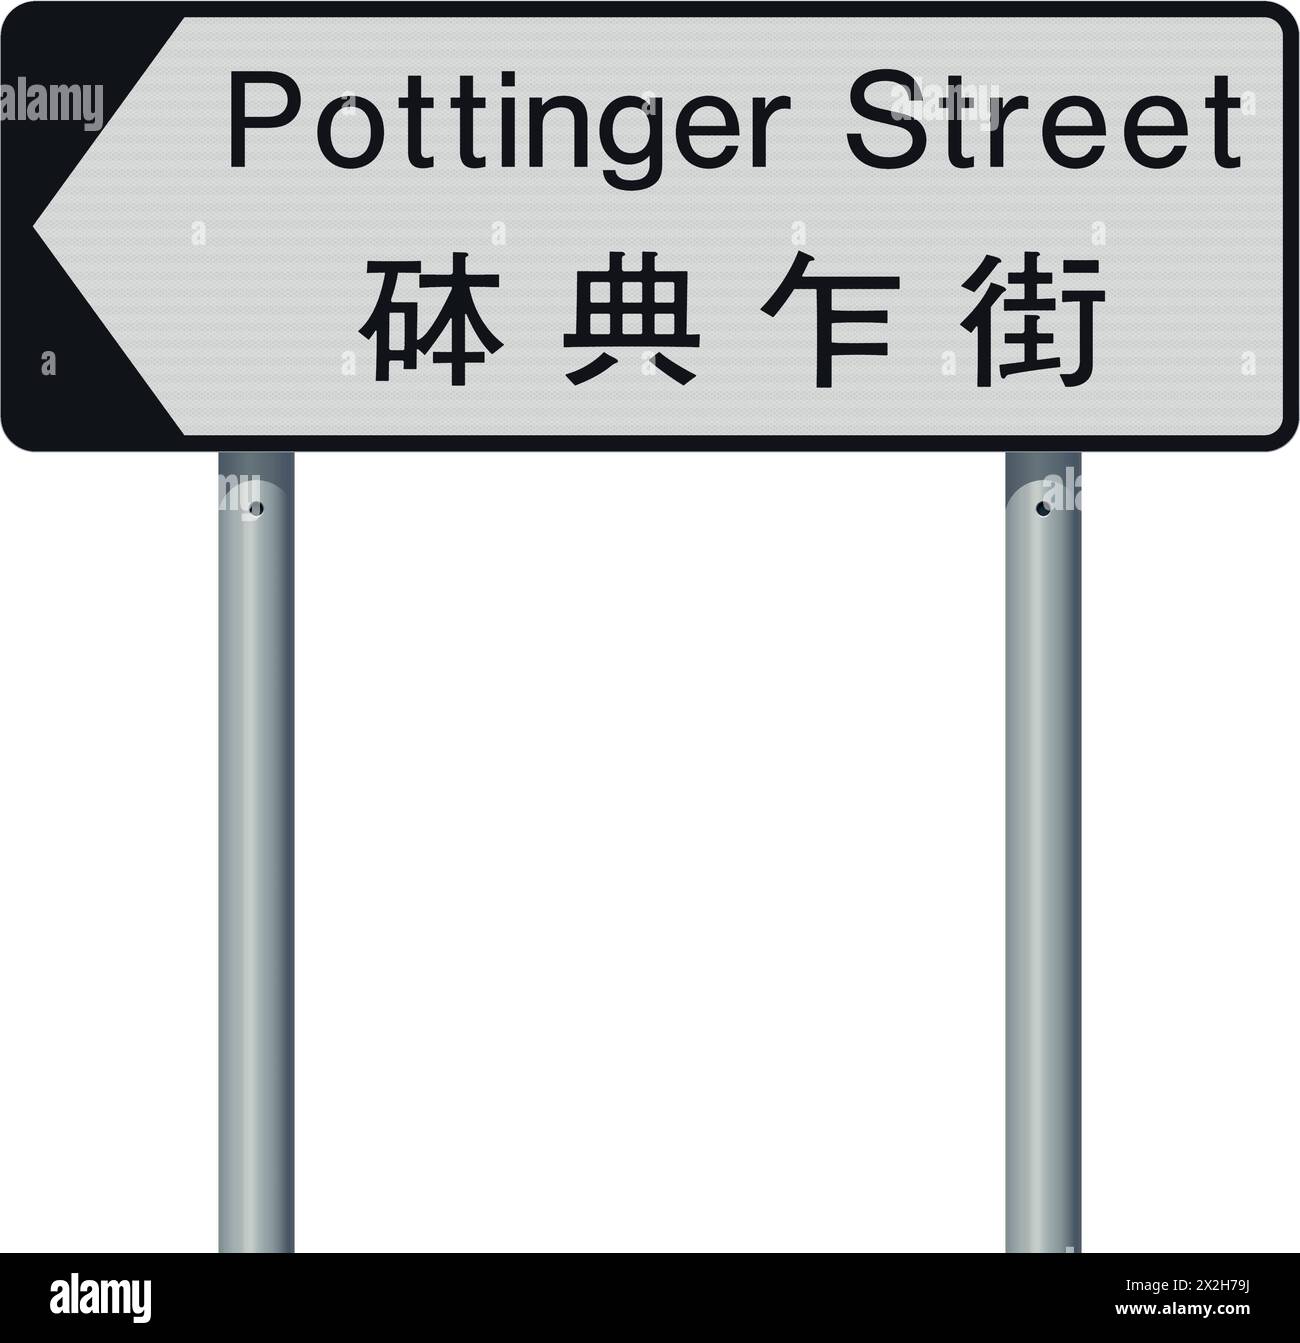 Vector illustration of Pottinger Street (Hong Kong) white and black road sign with Chinese translation Stock Vector